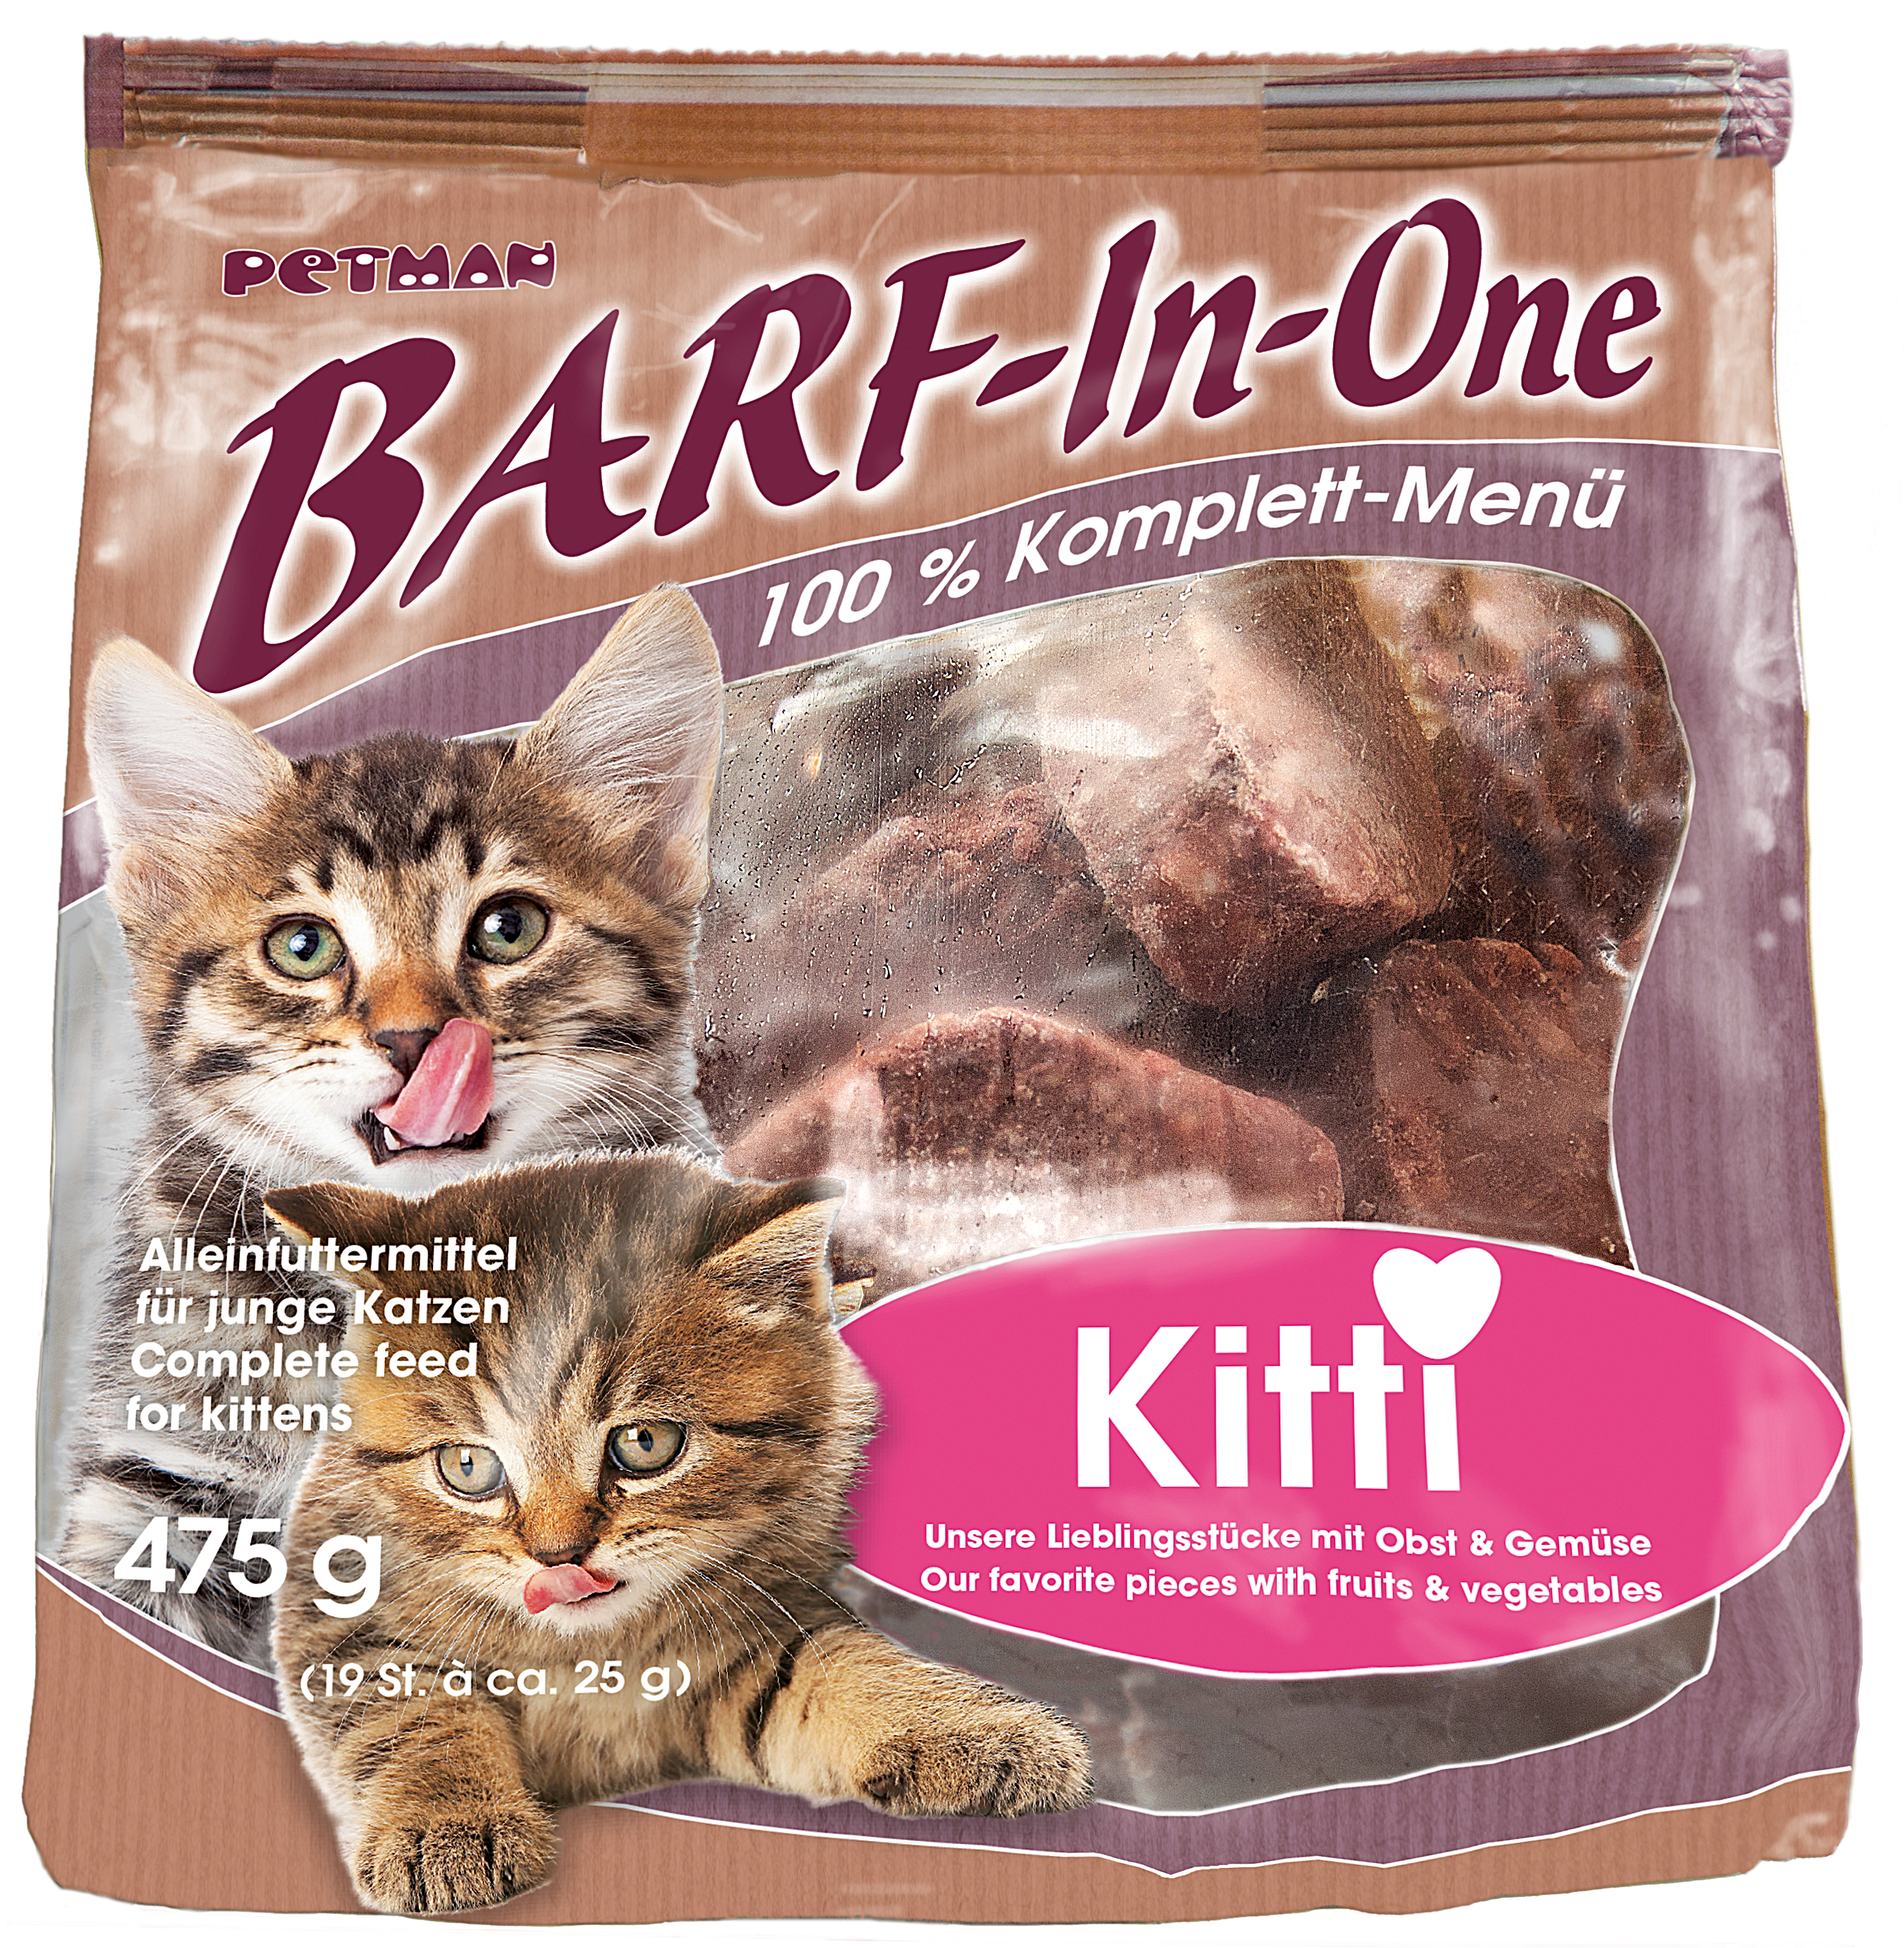 Petman Barf-In-One 475g